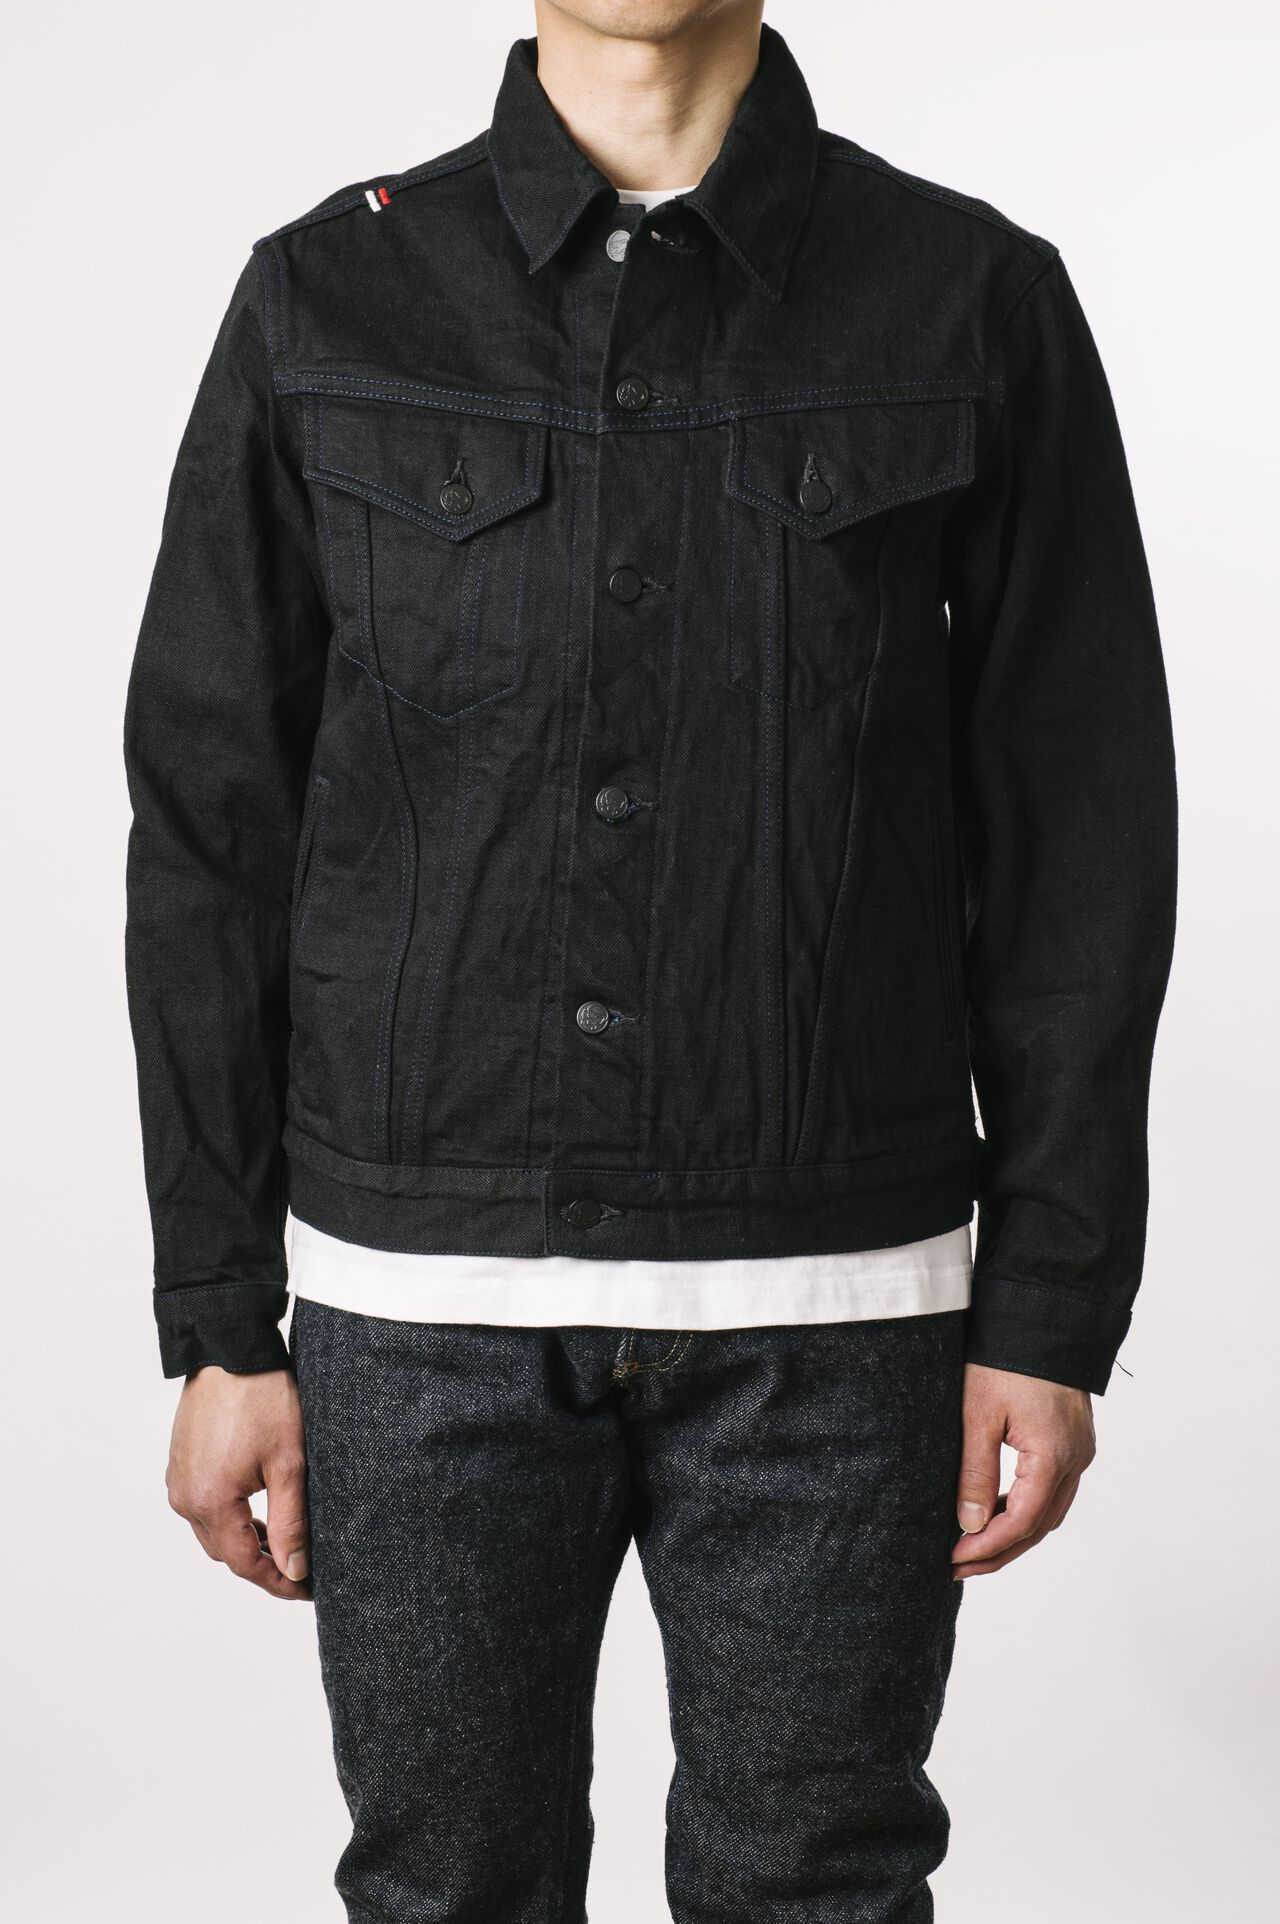 BKJKT3 15.5oz 3rd type Jacket with handwarmers-38-One Wash,, large image number 0